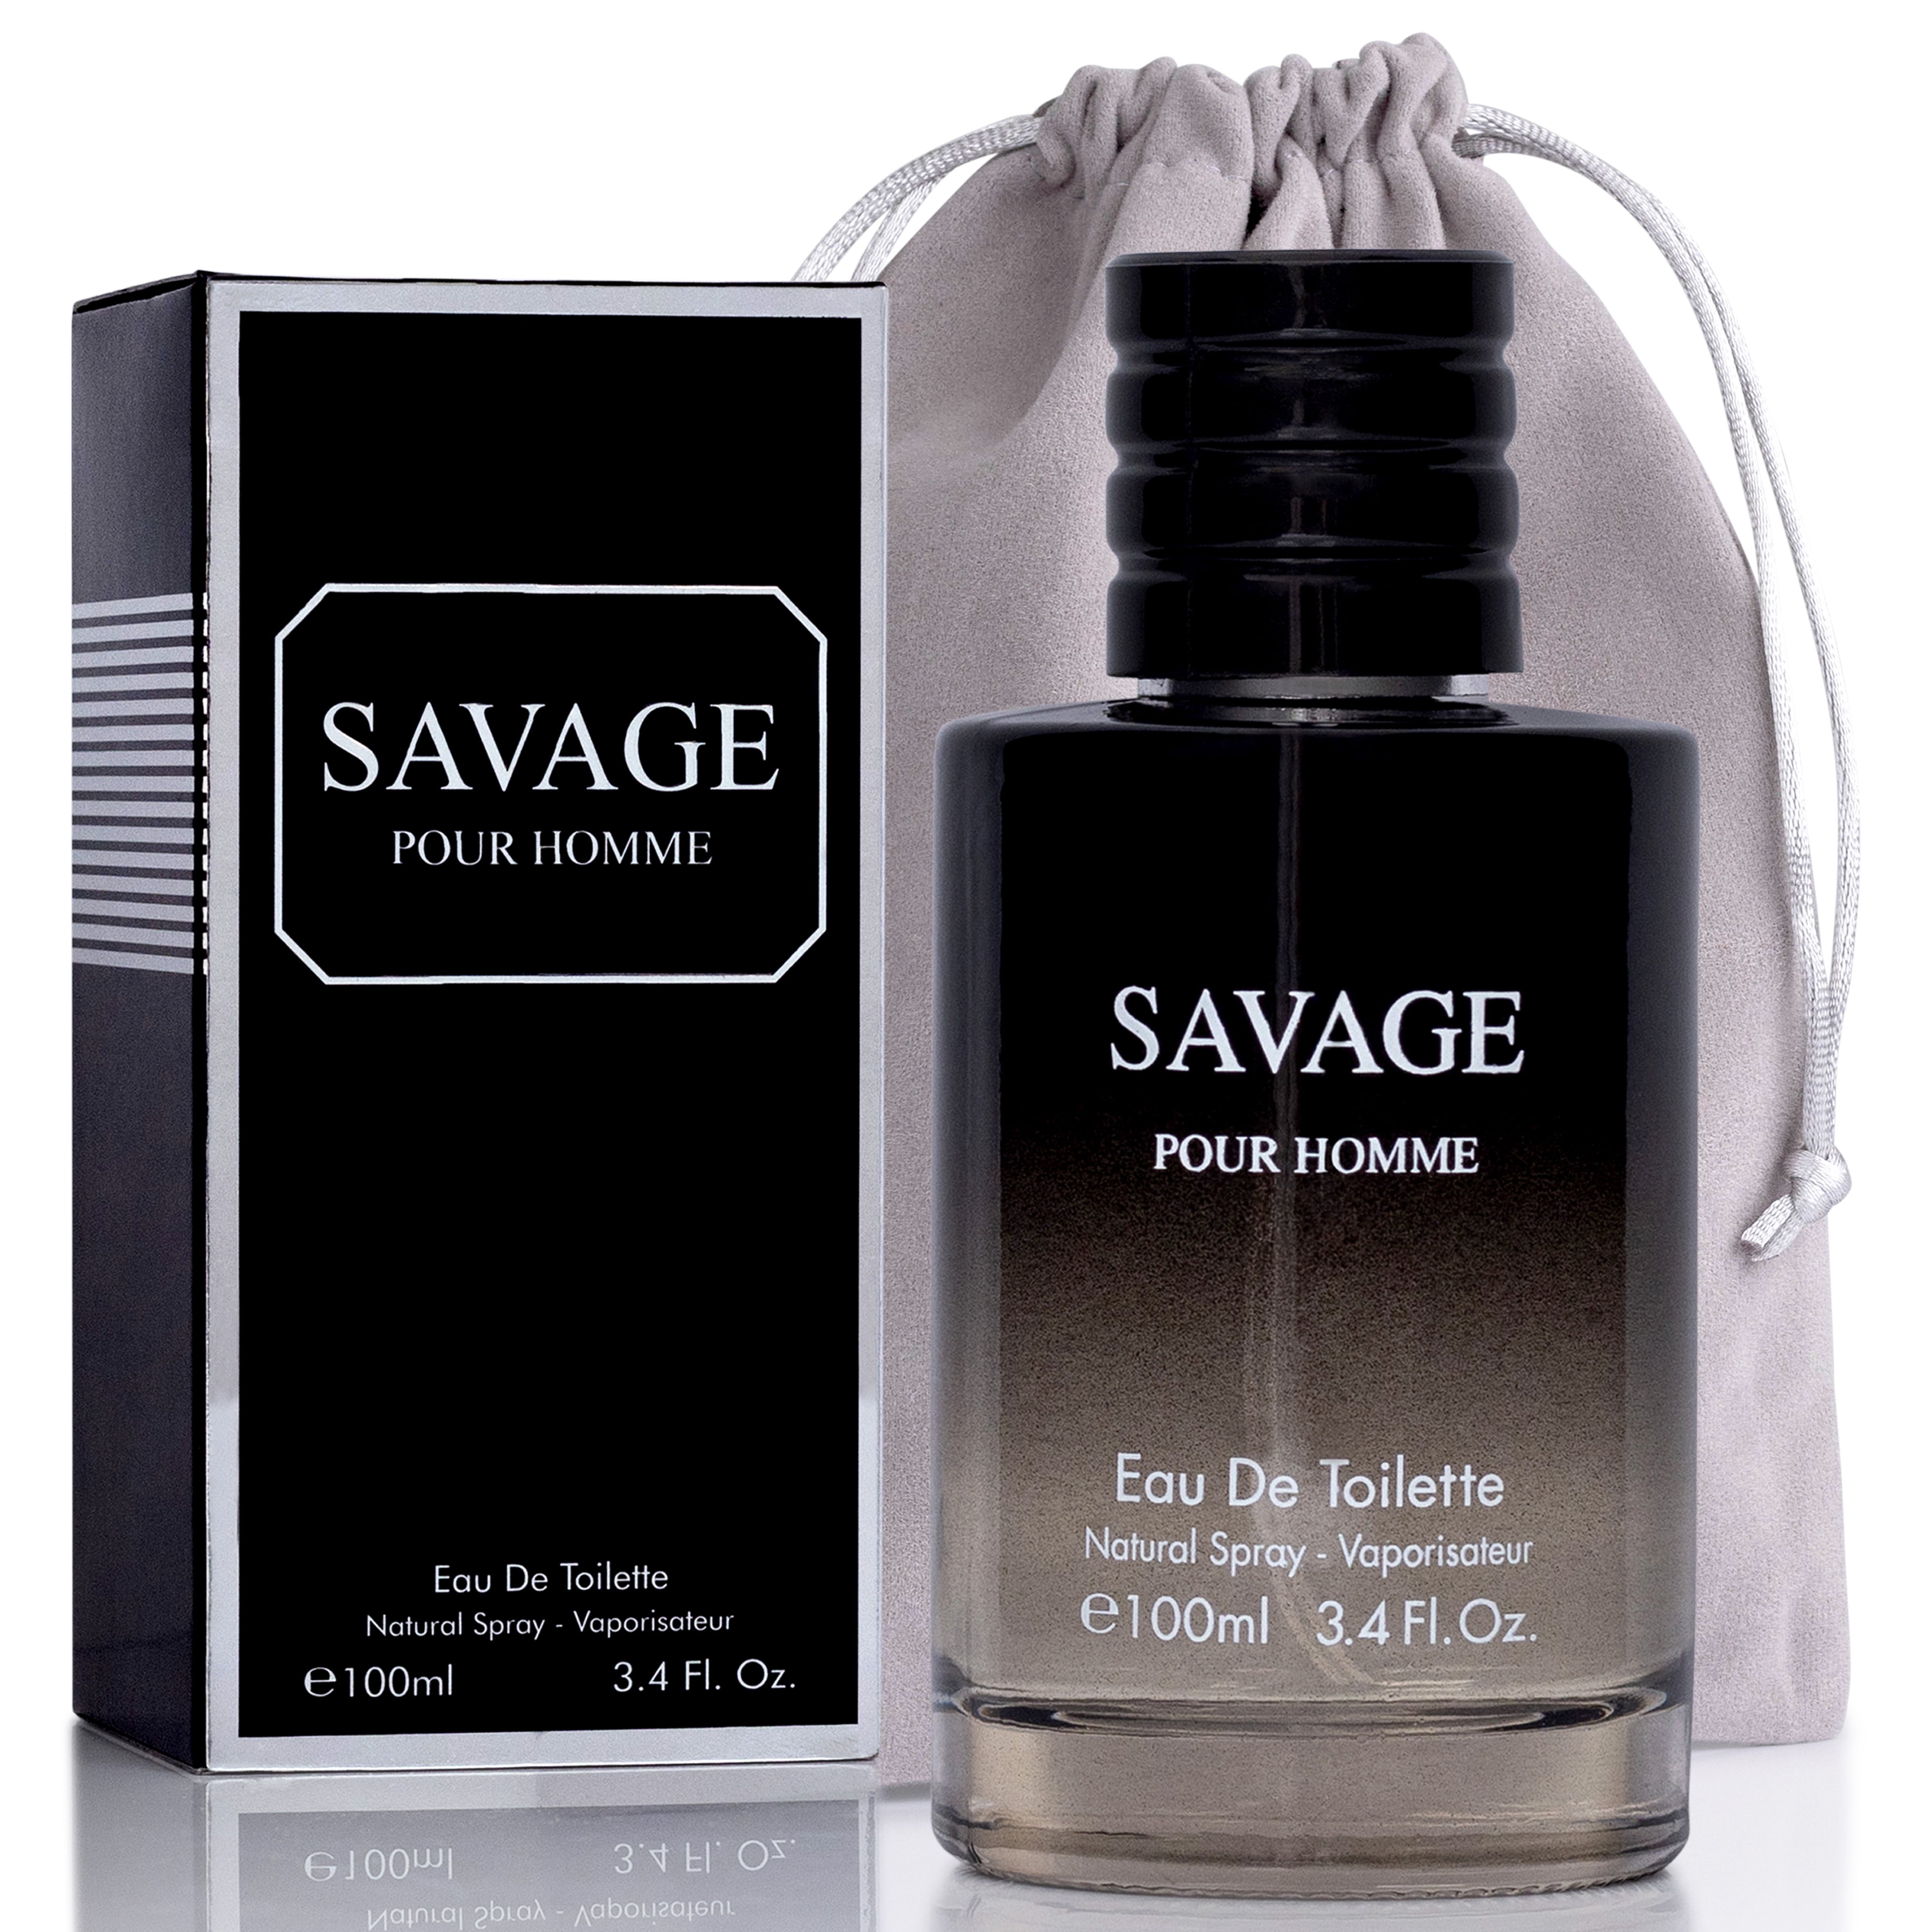 Savage for Men - 3.4 oz Men's Eau de Toilette Spray - Refreshing & Warm Masculine Scent for Daily Use Men's Casual Cologne Includes Novoglow Carrying